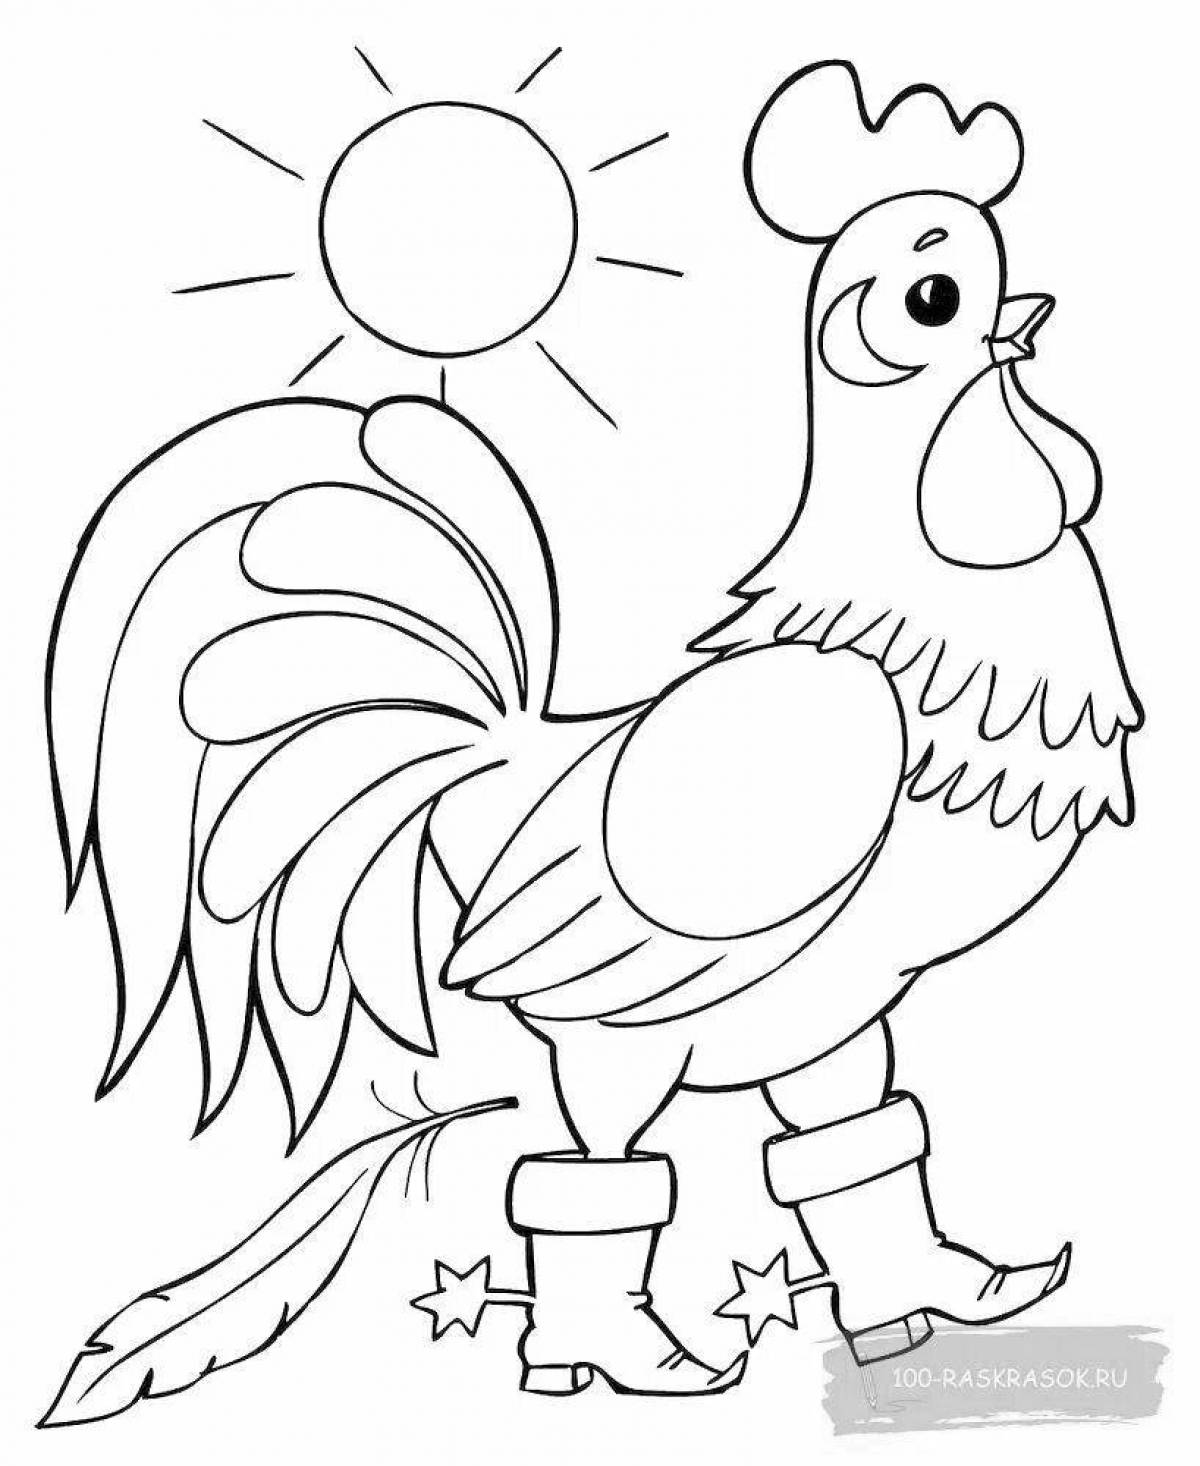 Rooster for kids #3